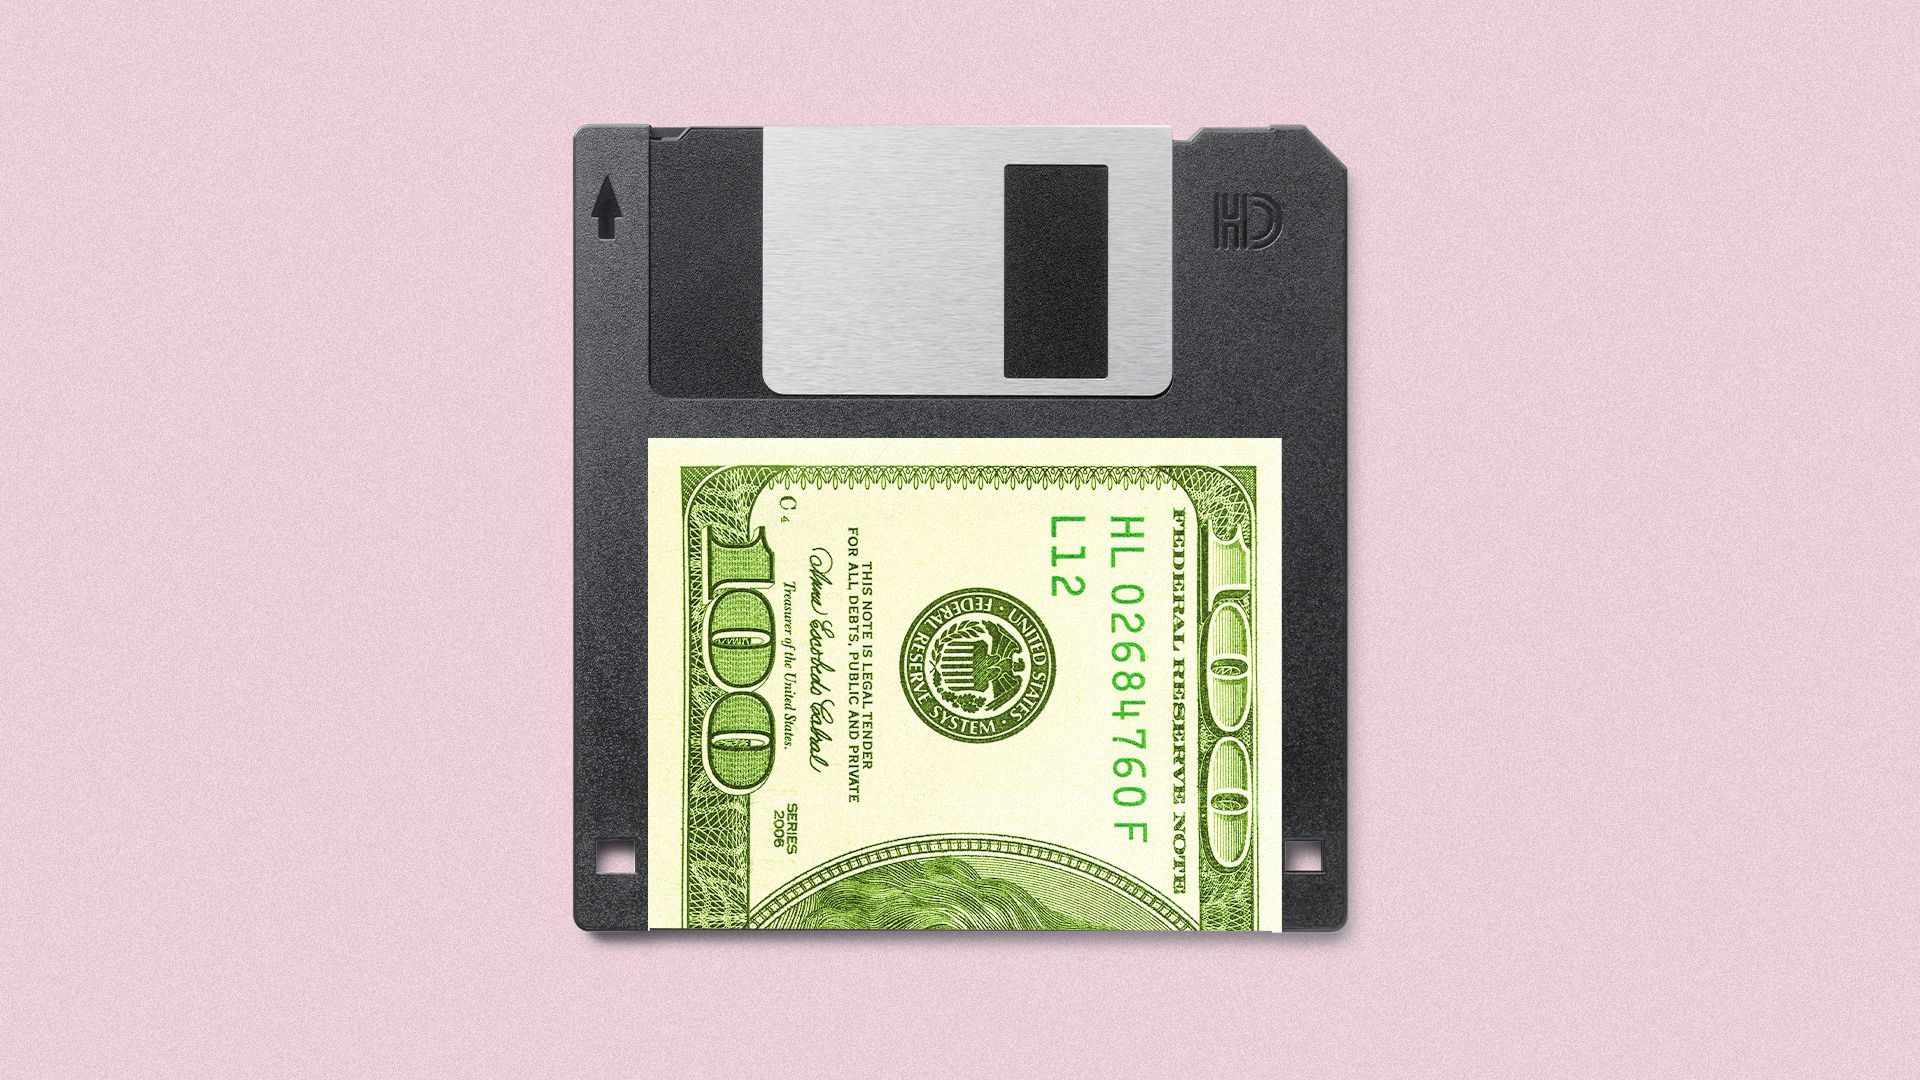 Illustration of a hundred dollar bill as the label on a floppy disk.  